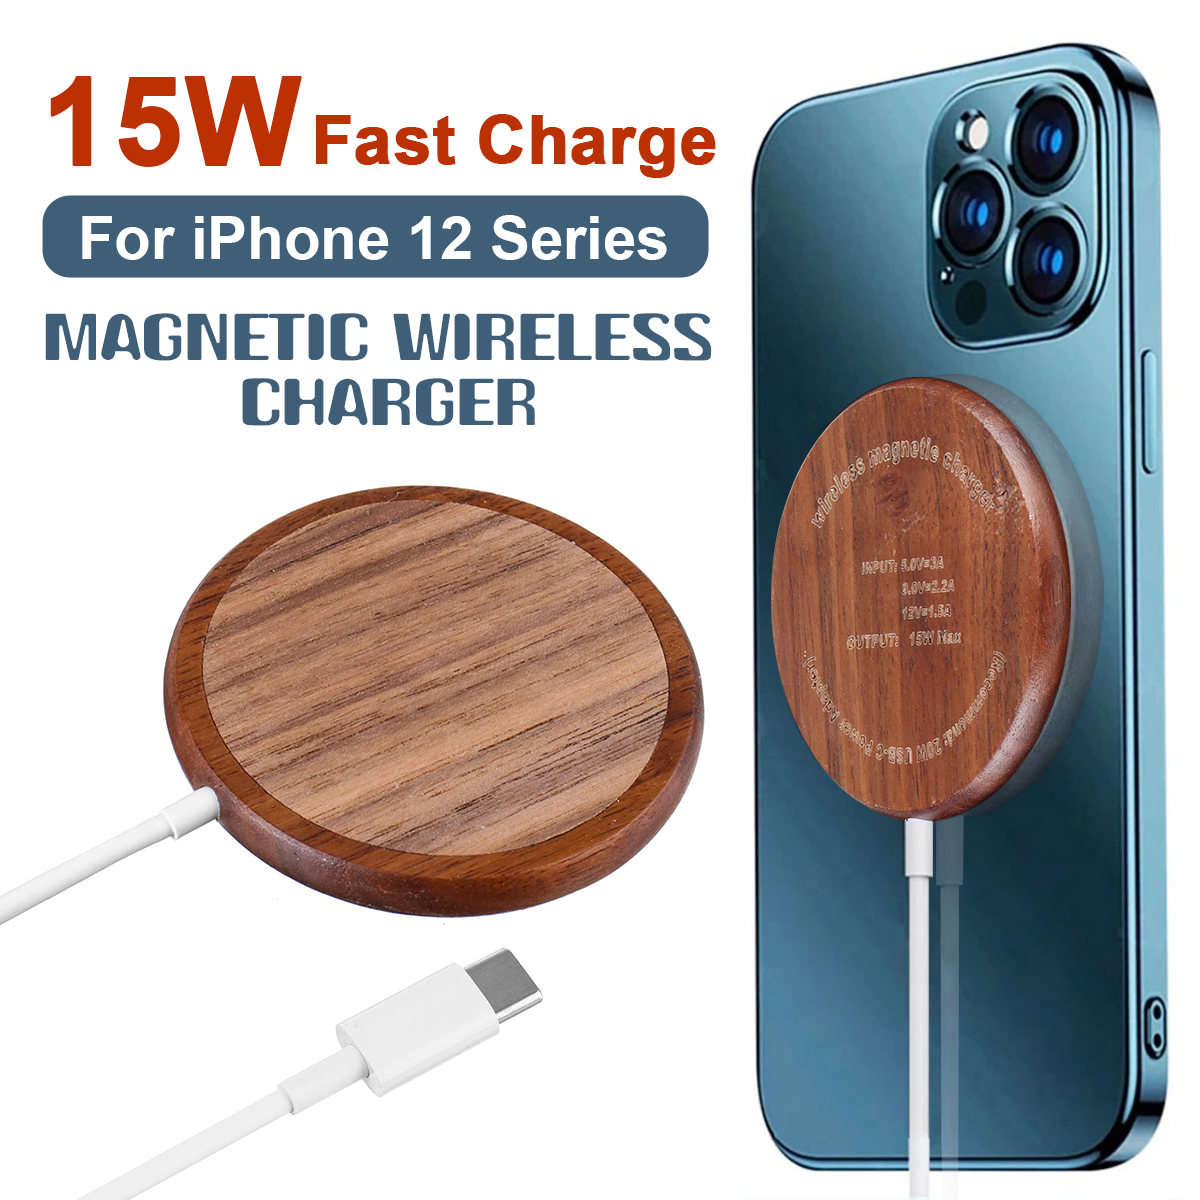 Bakeey-15W-Magnetic-Wireless-Charger-for-iPhone-12-Series-for-iPhone-12-Mini12-Pro12-Pro-Max-for-Sam-1809701-1